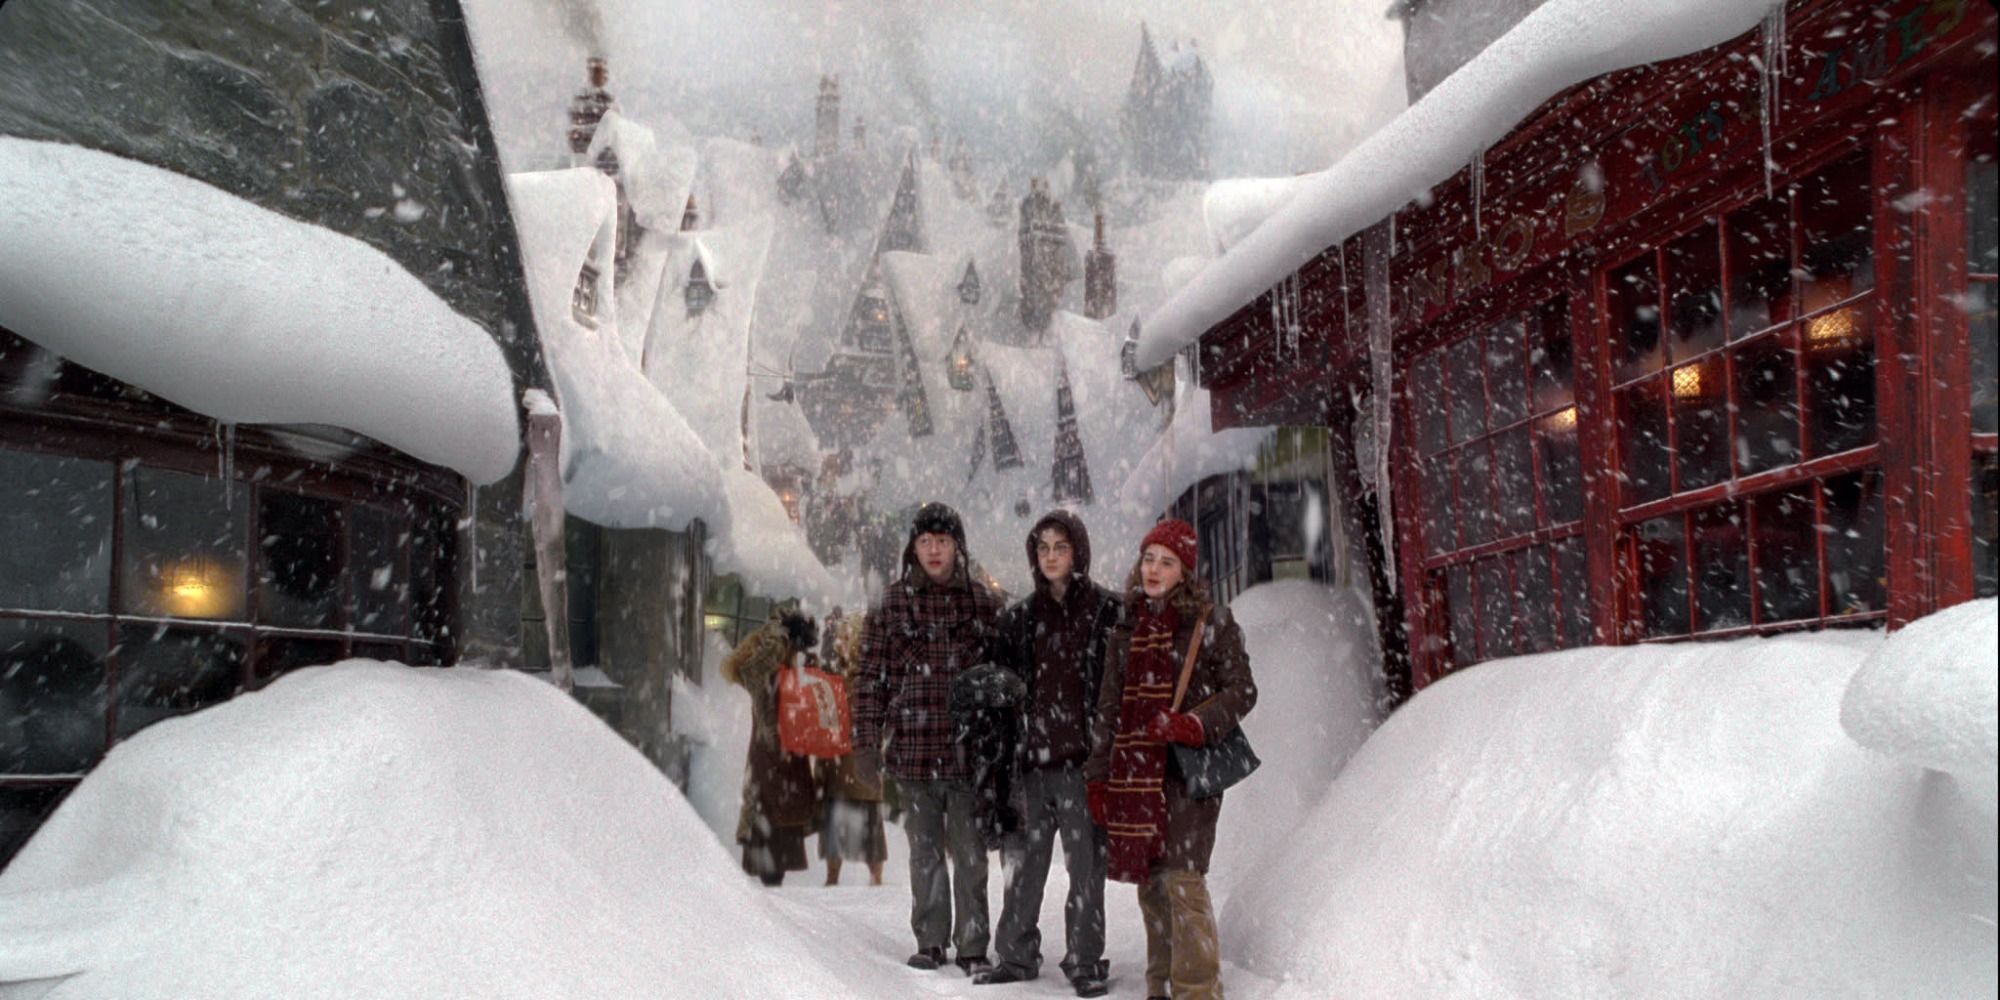 Harry, Ron, and Hermione in Hogsmeade covered by snow.